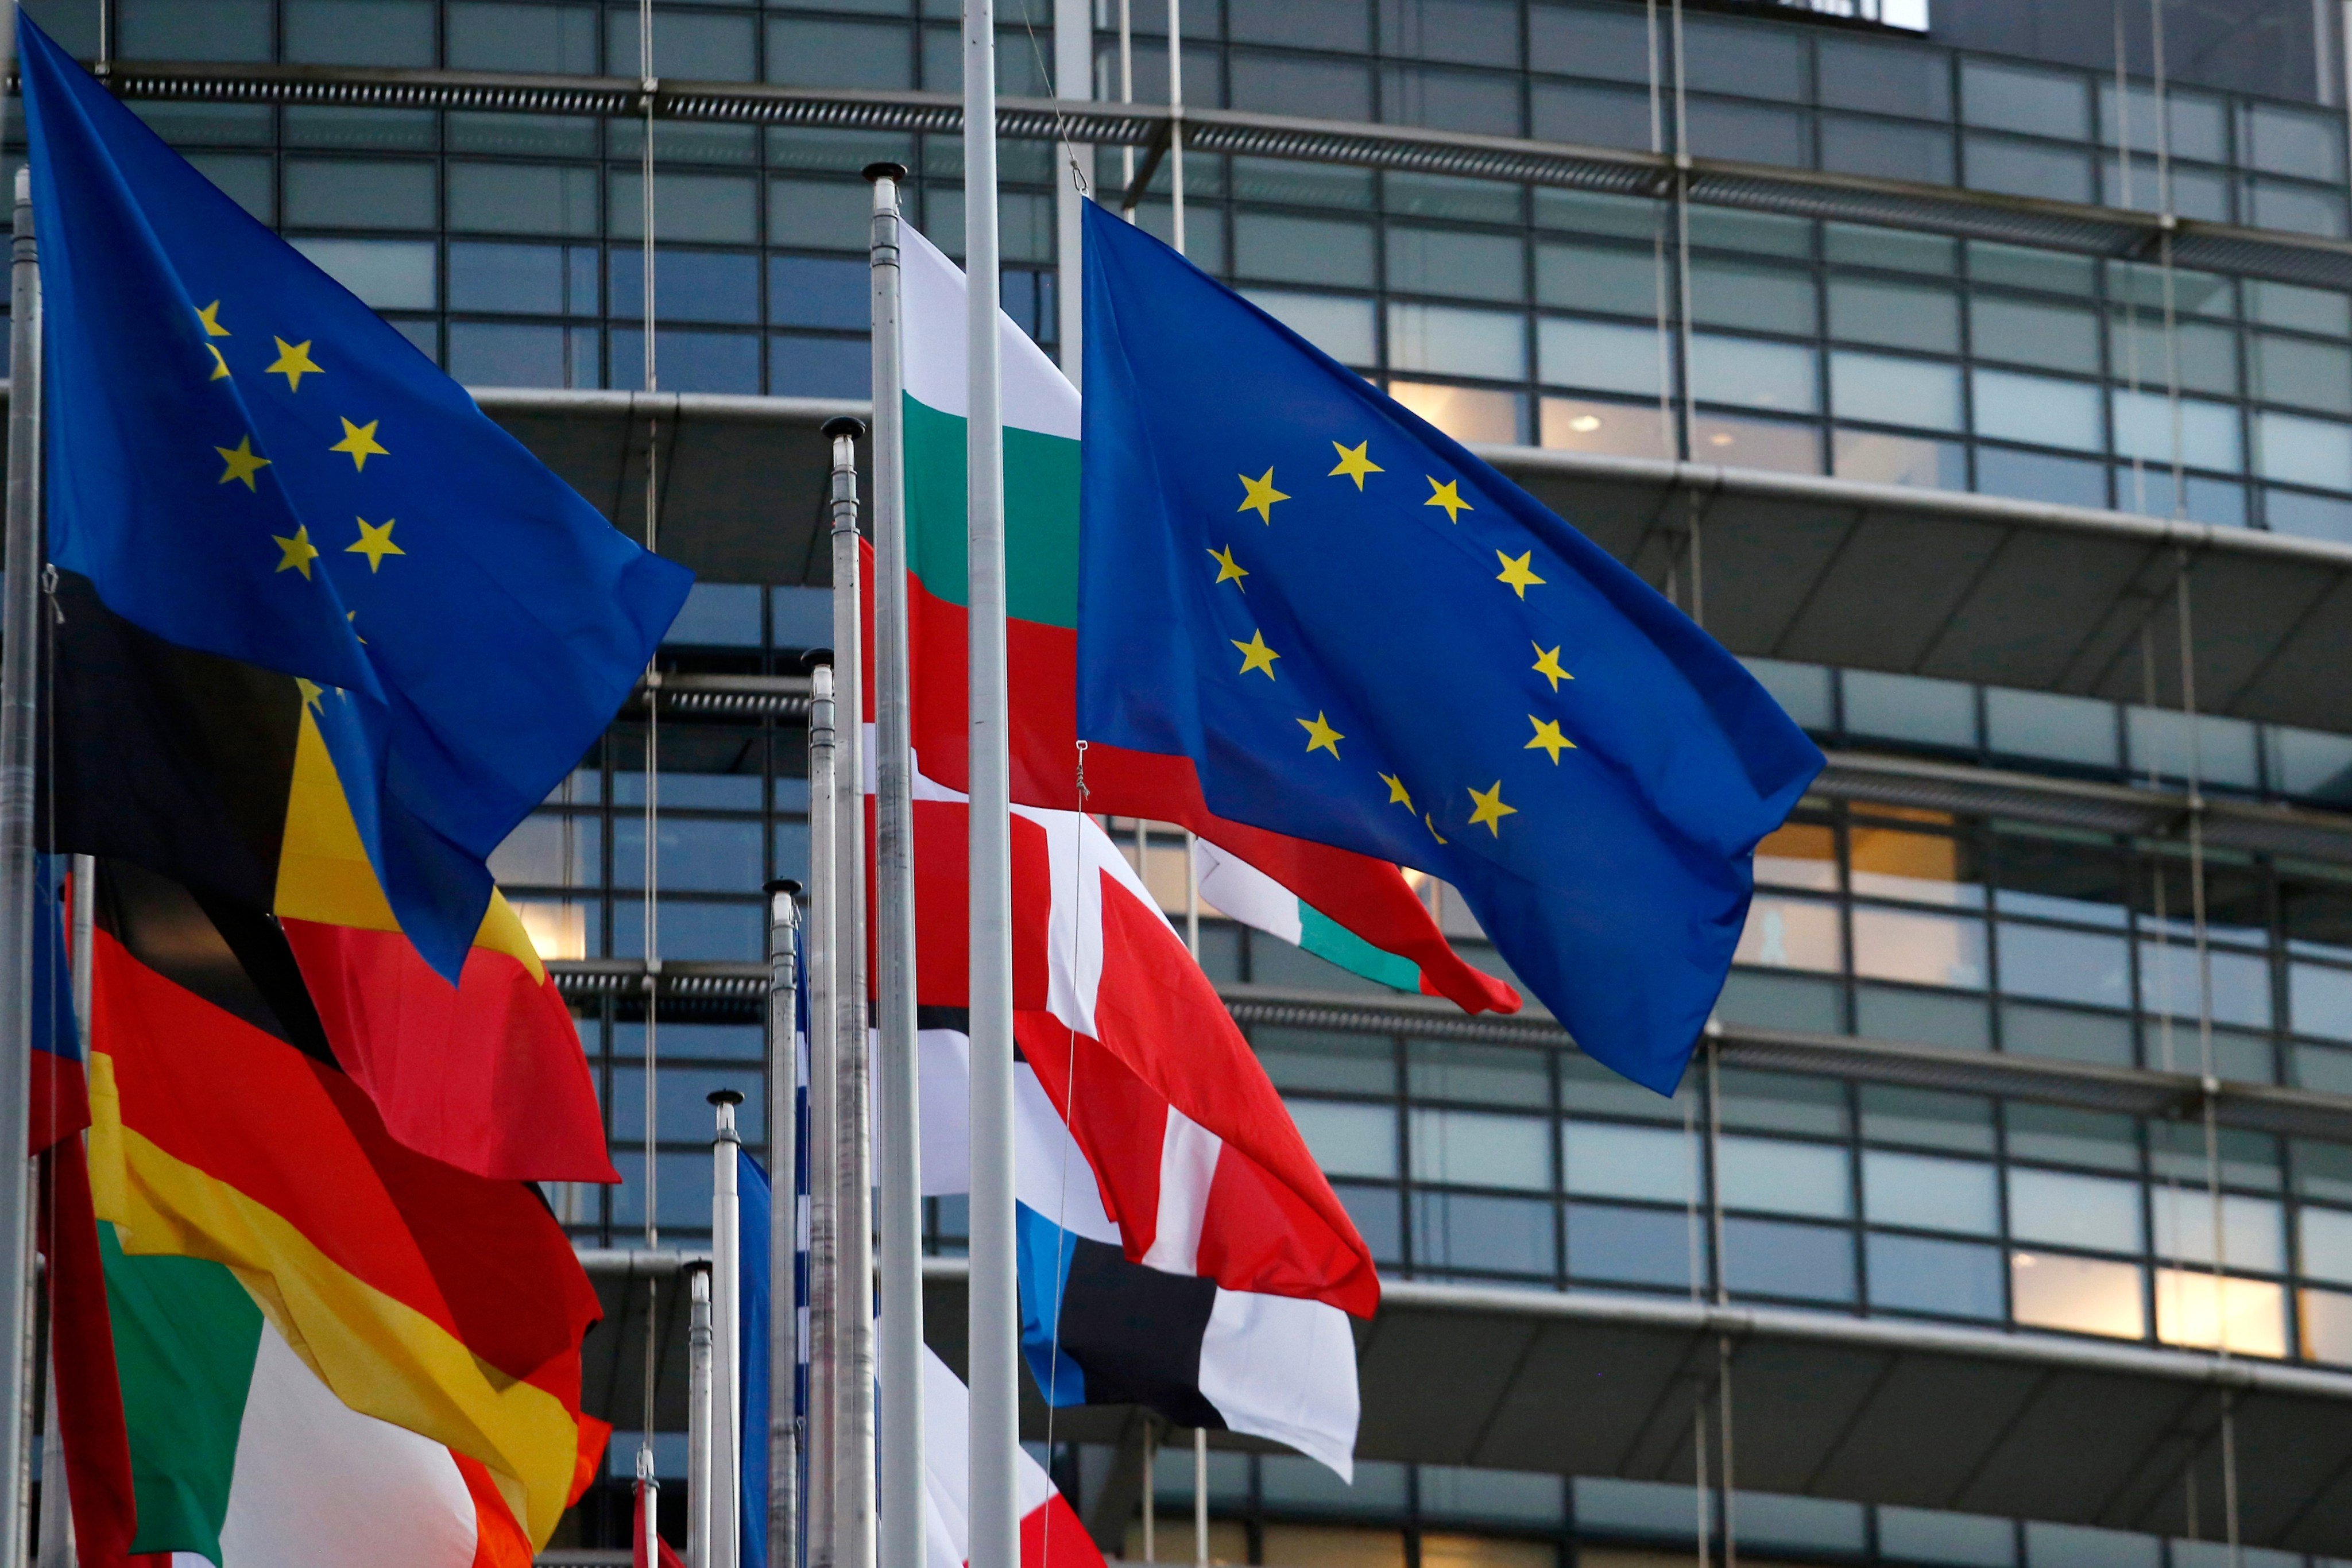 The flags of the European Union member states outside the Louise Weiss building, the principle seat of the European Parliament, in Strasbourg, France, on January 18, 2022. Photo: Bloomberg